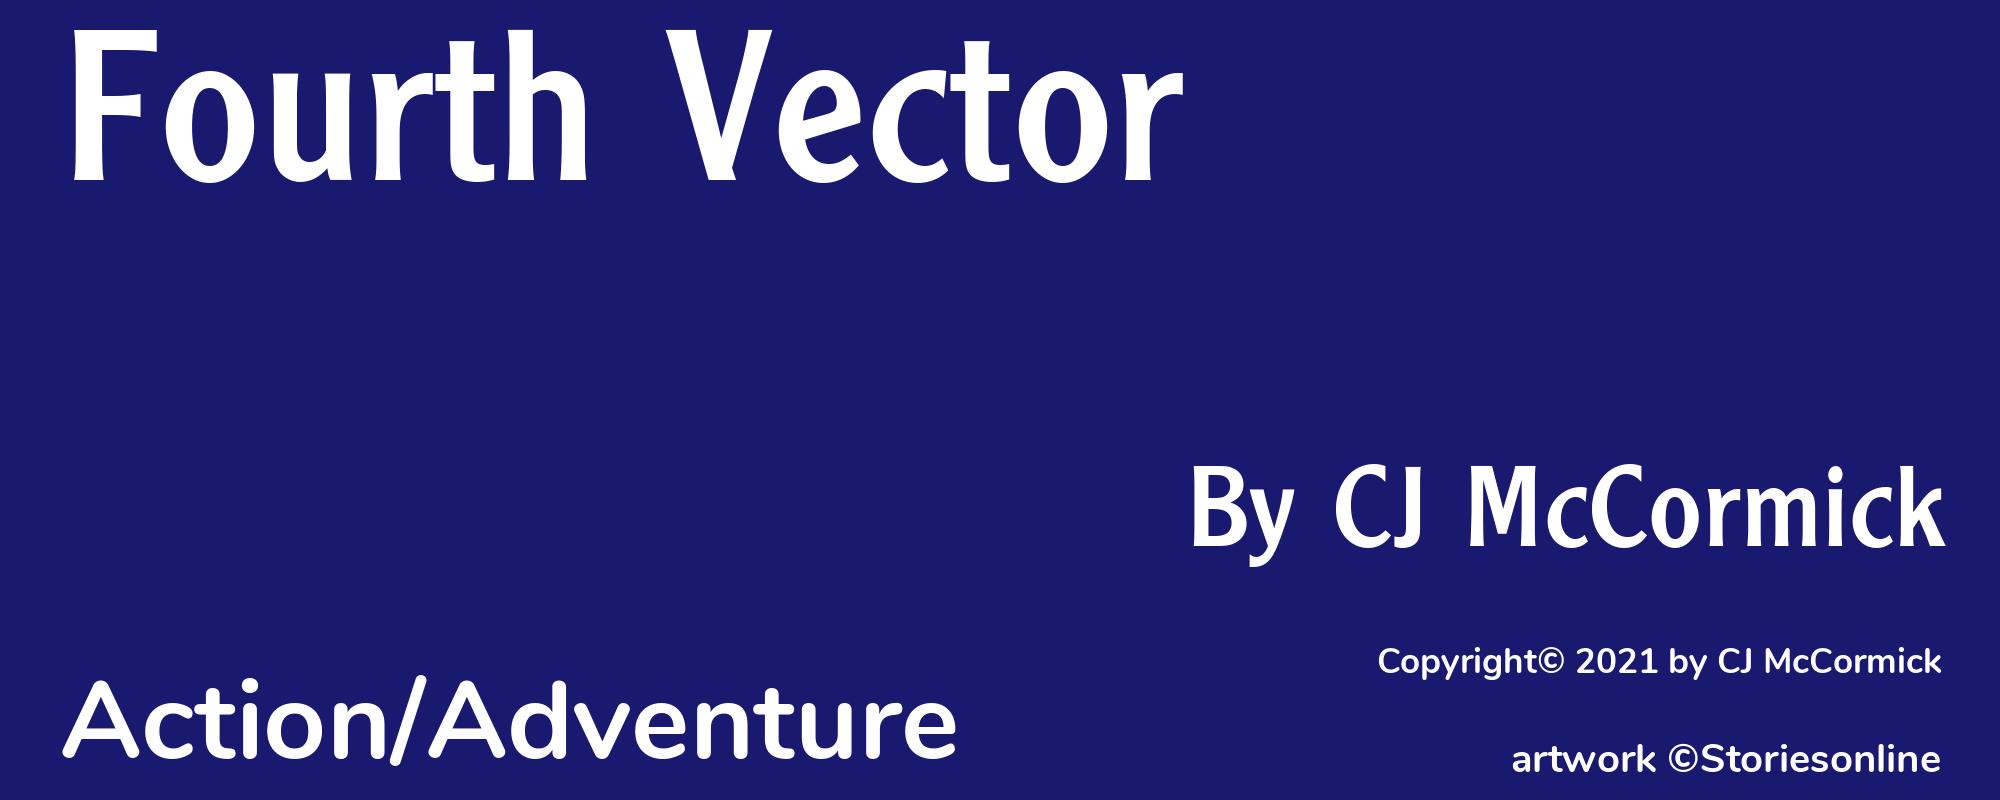 Fourth Vector - Cover